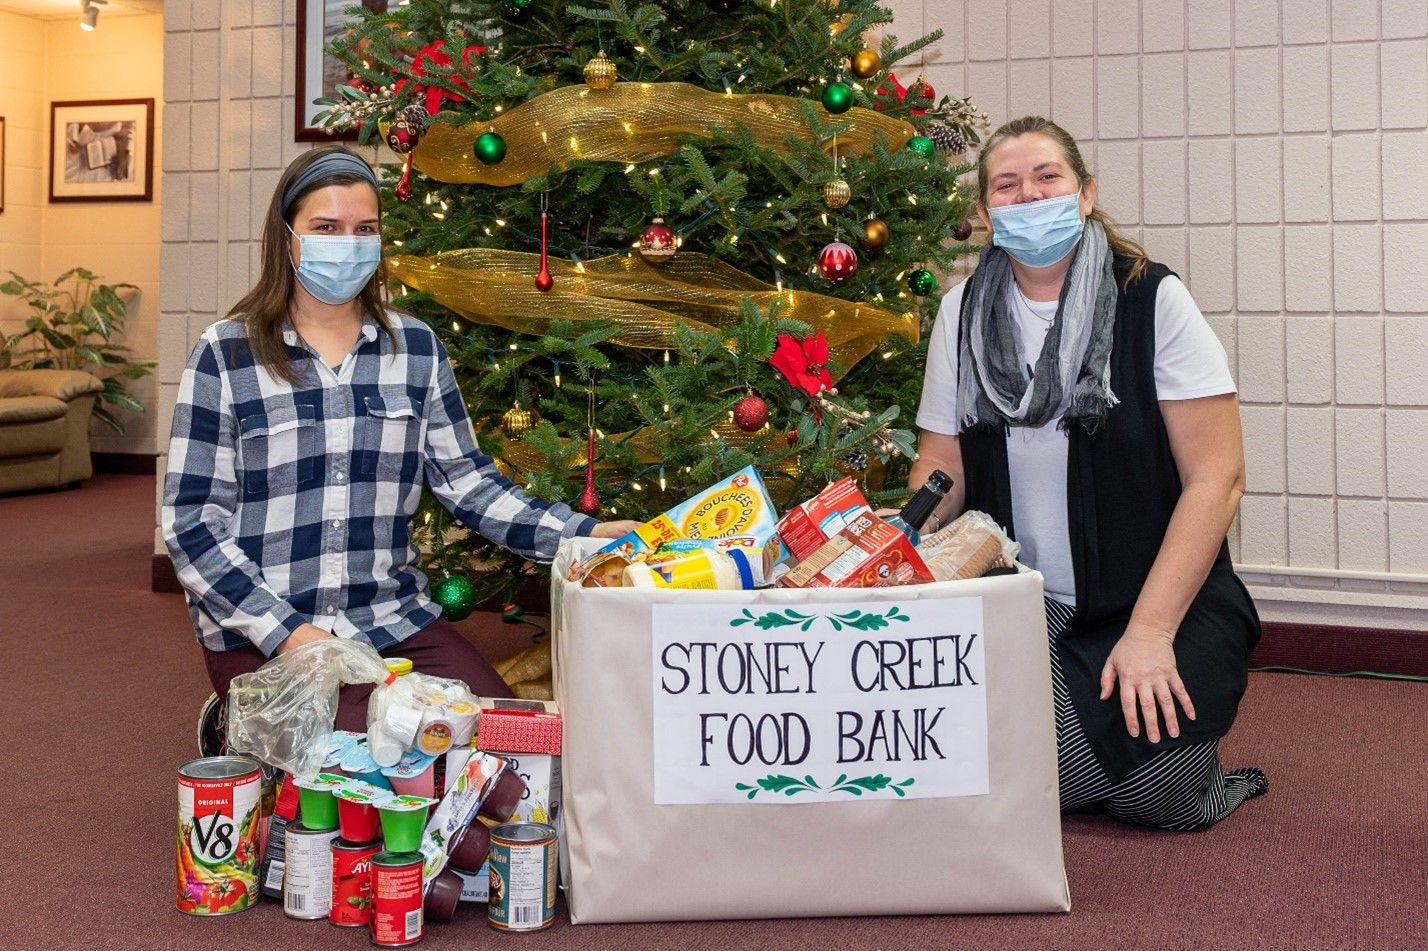 GFA World joins with their community to provide for citizens in need during the COVID pandemic through food bank donations.